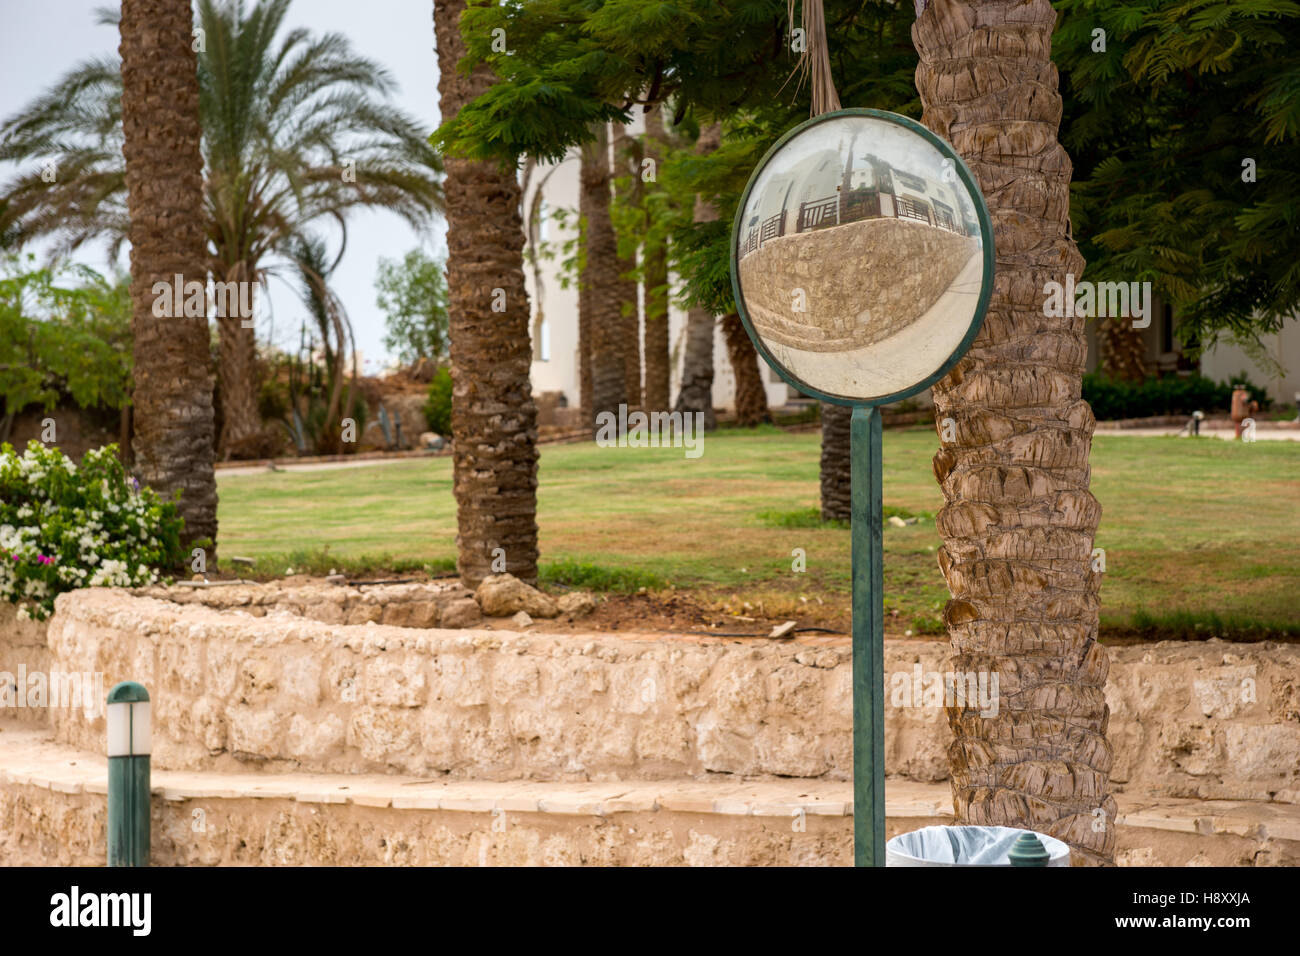 Traffic convex mirror for safety driving in front of the yard with palm trees, bushes and flowers Stock Photo